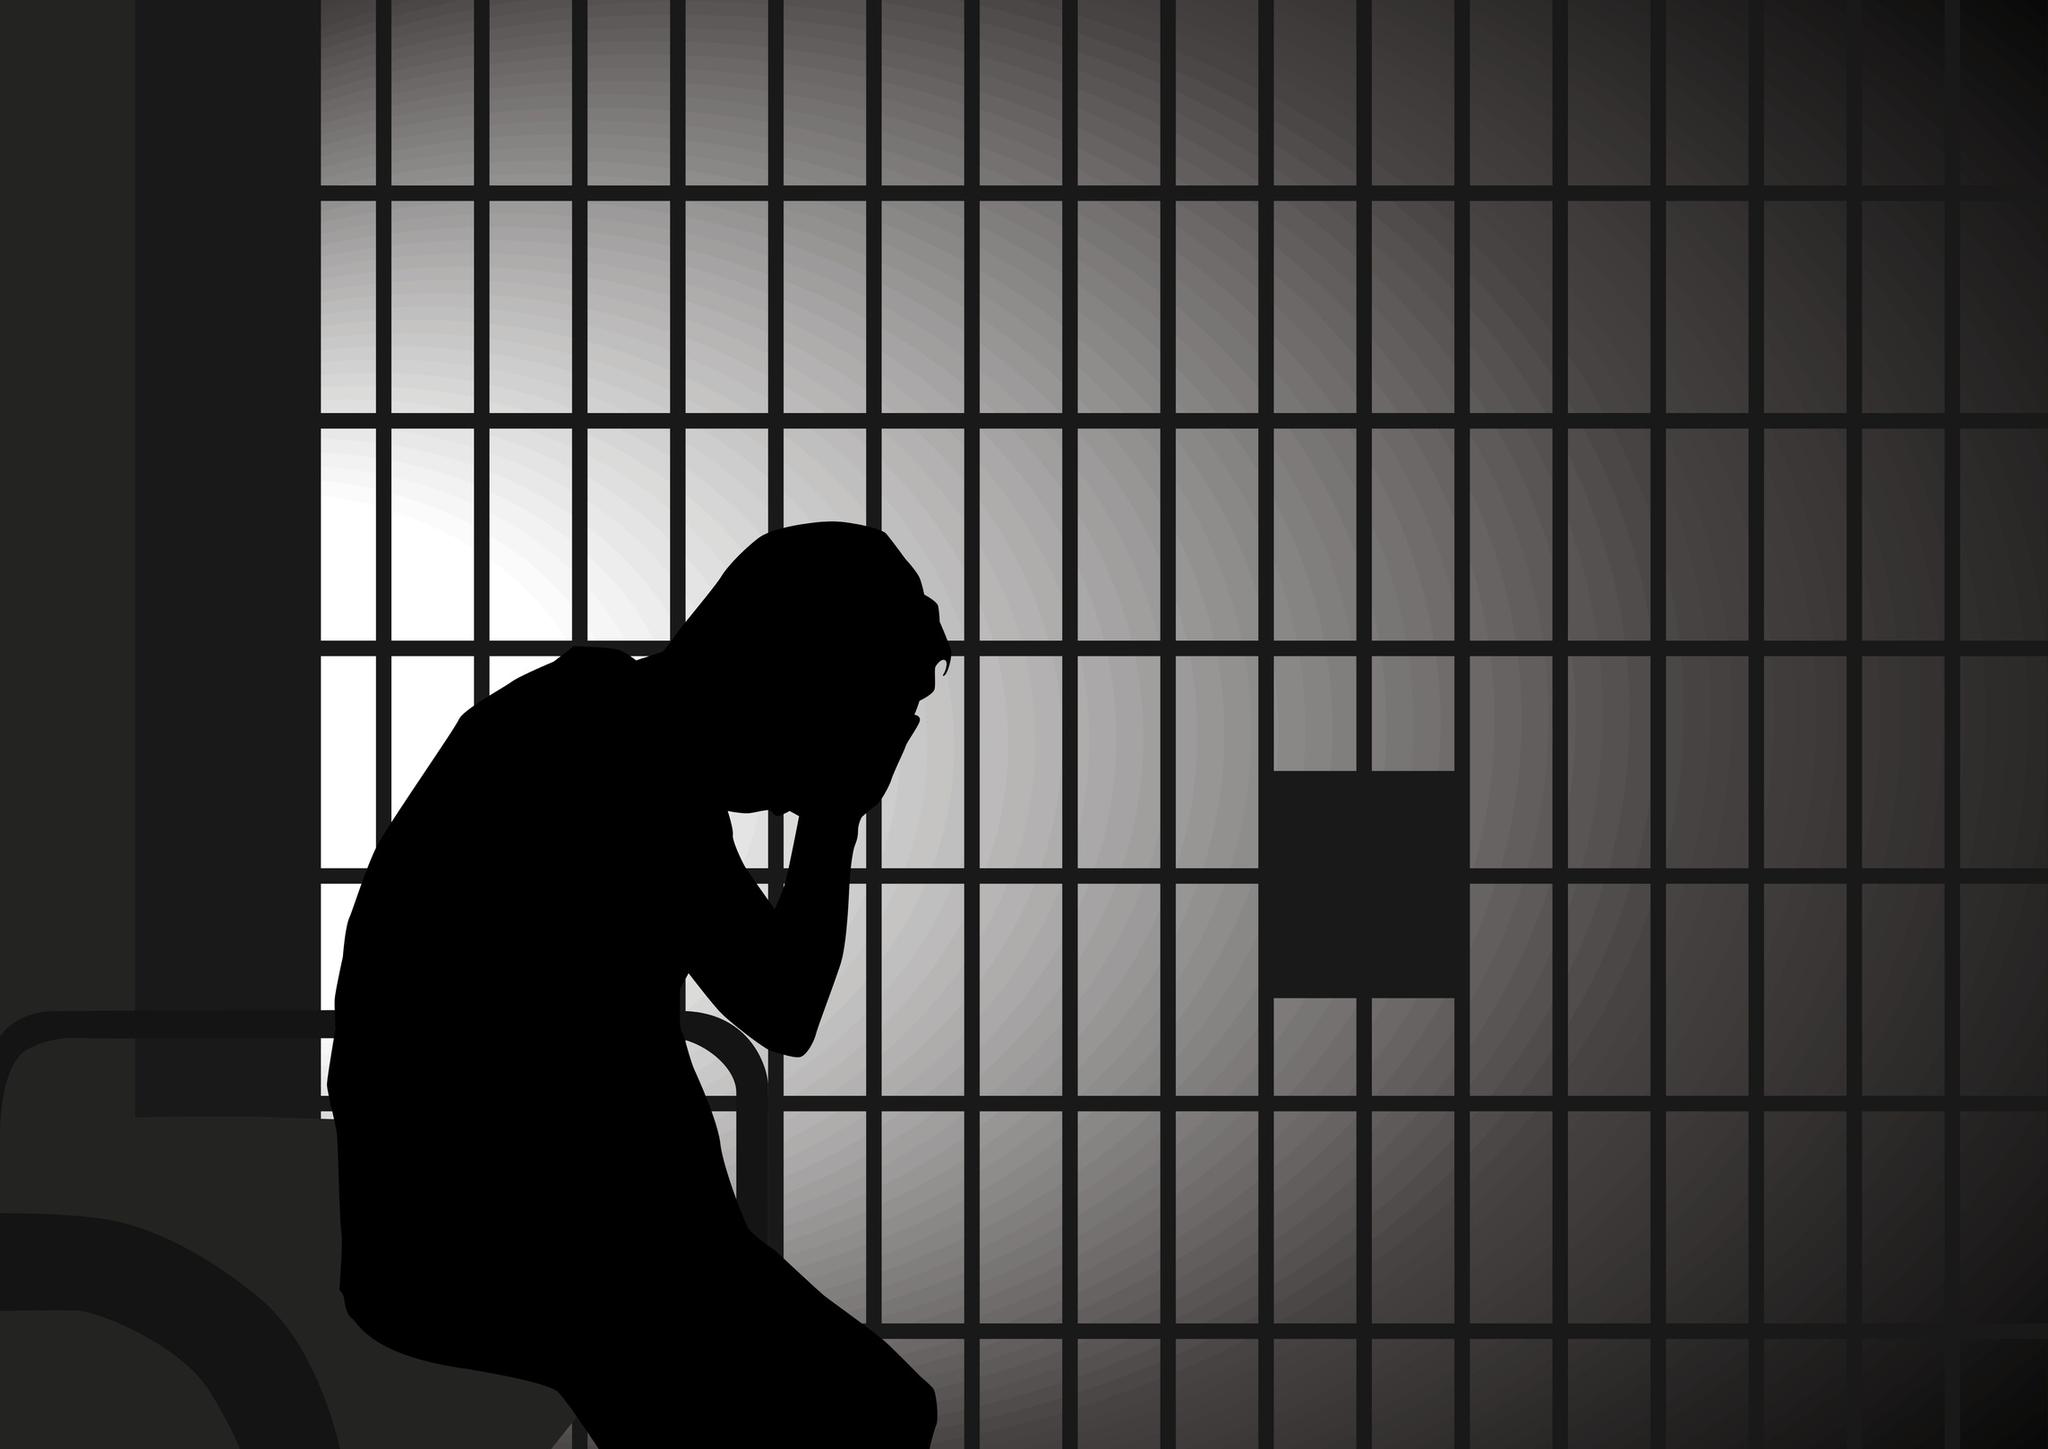 Person silhouetted behind bars. From: http://www.ssc.wisc.edu/clsj/media/jail/